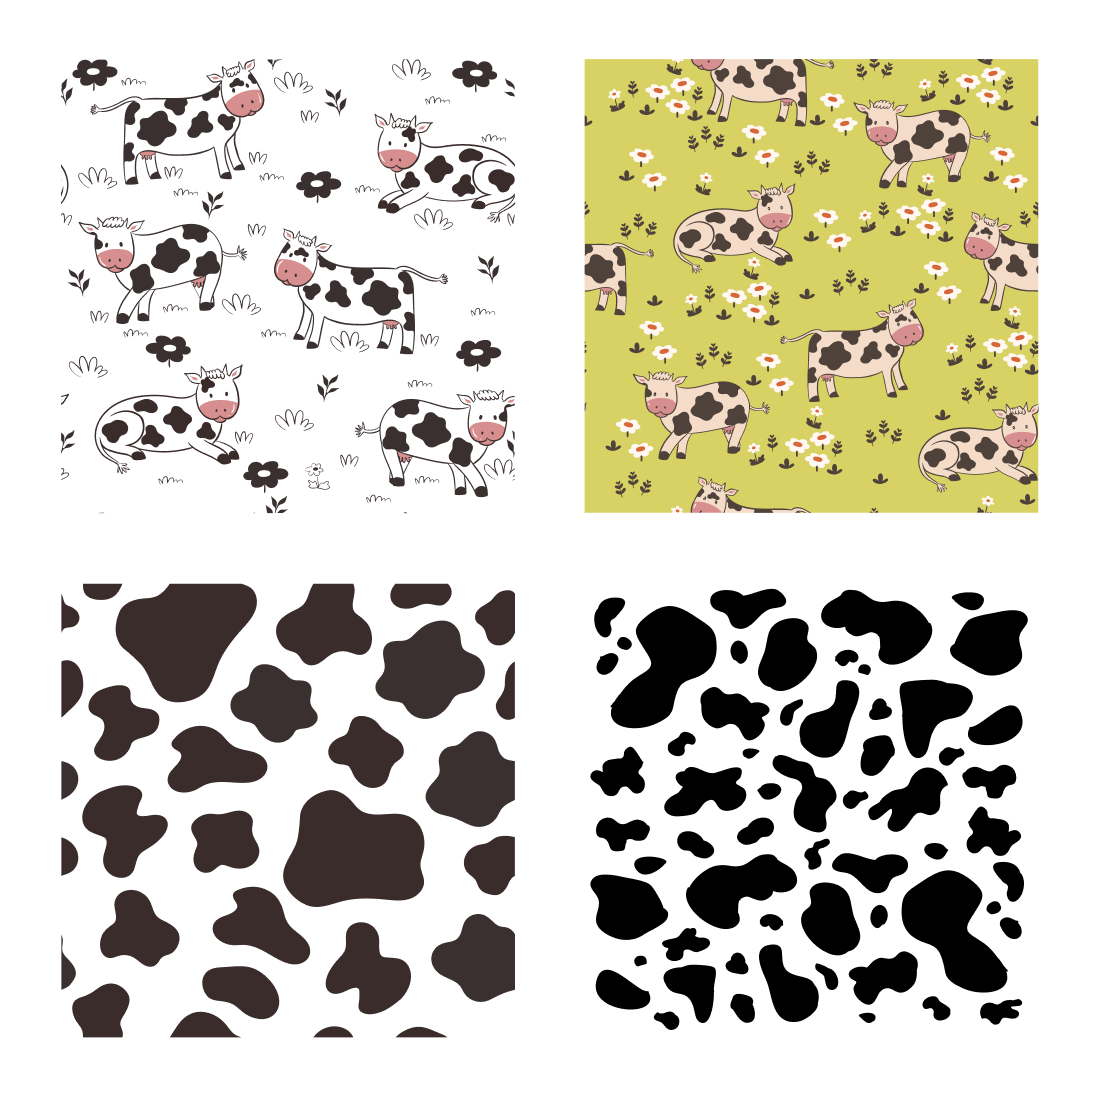 Images of cows with spots, as well as similar prints.